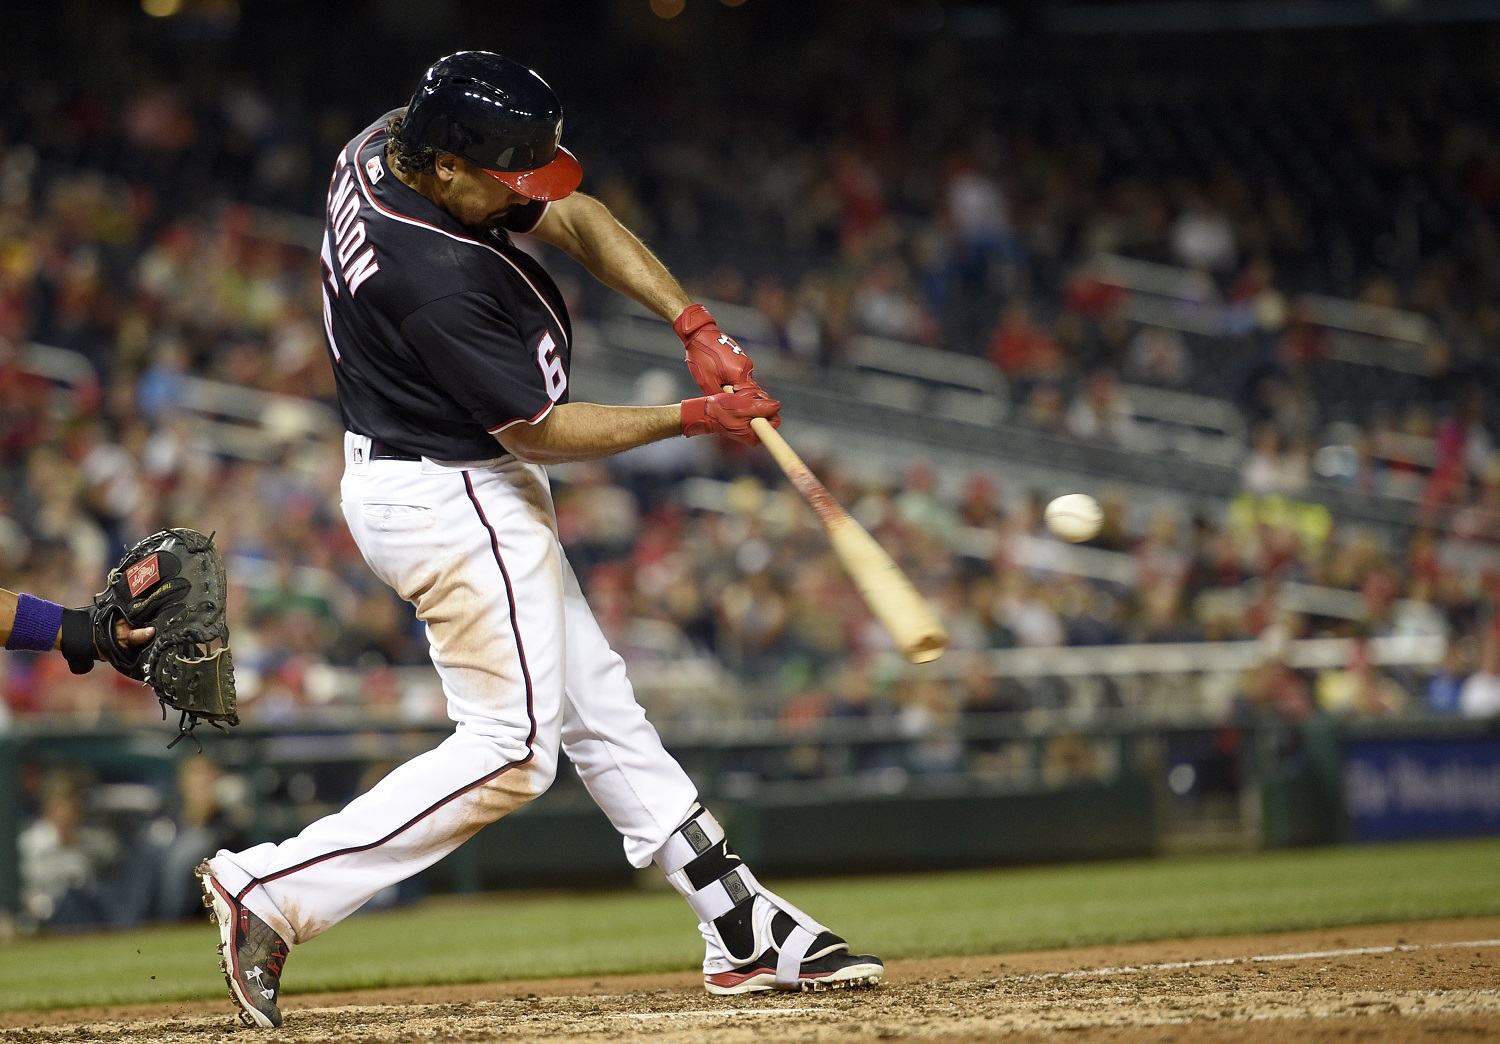 Washington Nationals' Anthony Rendon bats during an interleague baseball game against the Minnesota Twins, Friday, April 22, 2016, in Washington. The Nationals won 8-4. (AP Photo/Nick Wass)